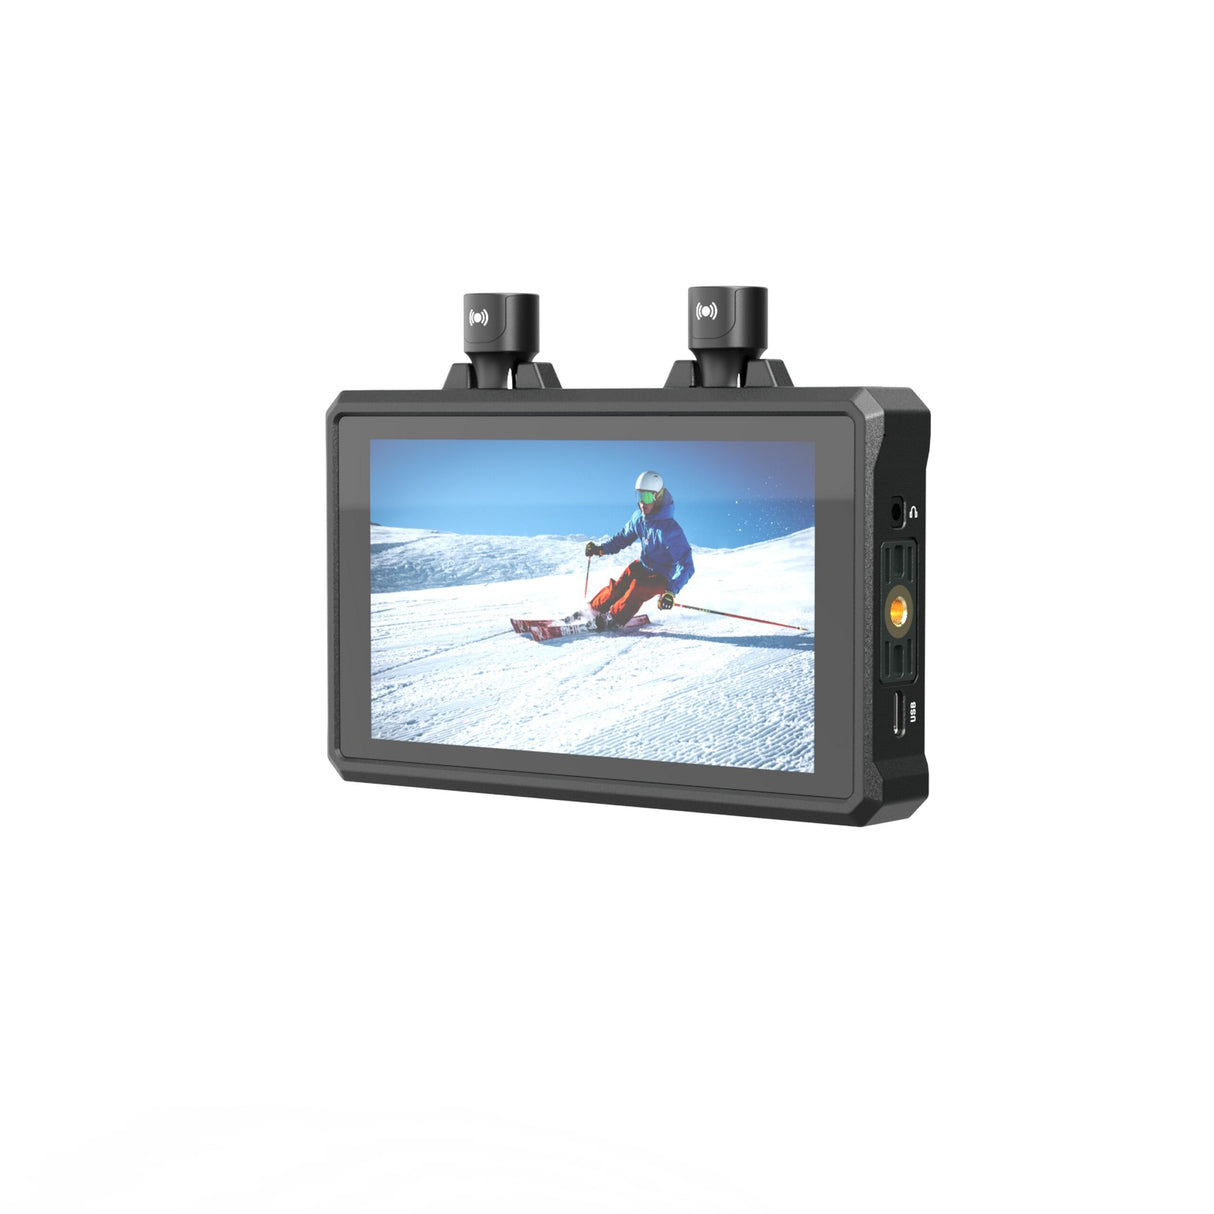 Hollyland Mars M1 5.5-Inch Monitor with Built-in Video Transmitter/Receiver Single Pack